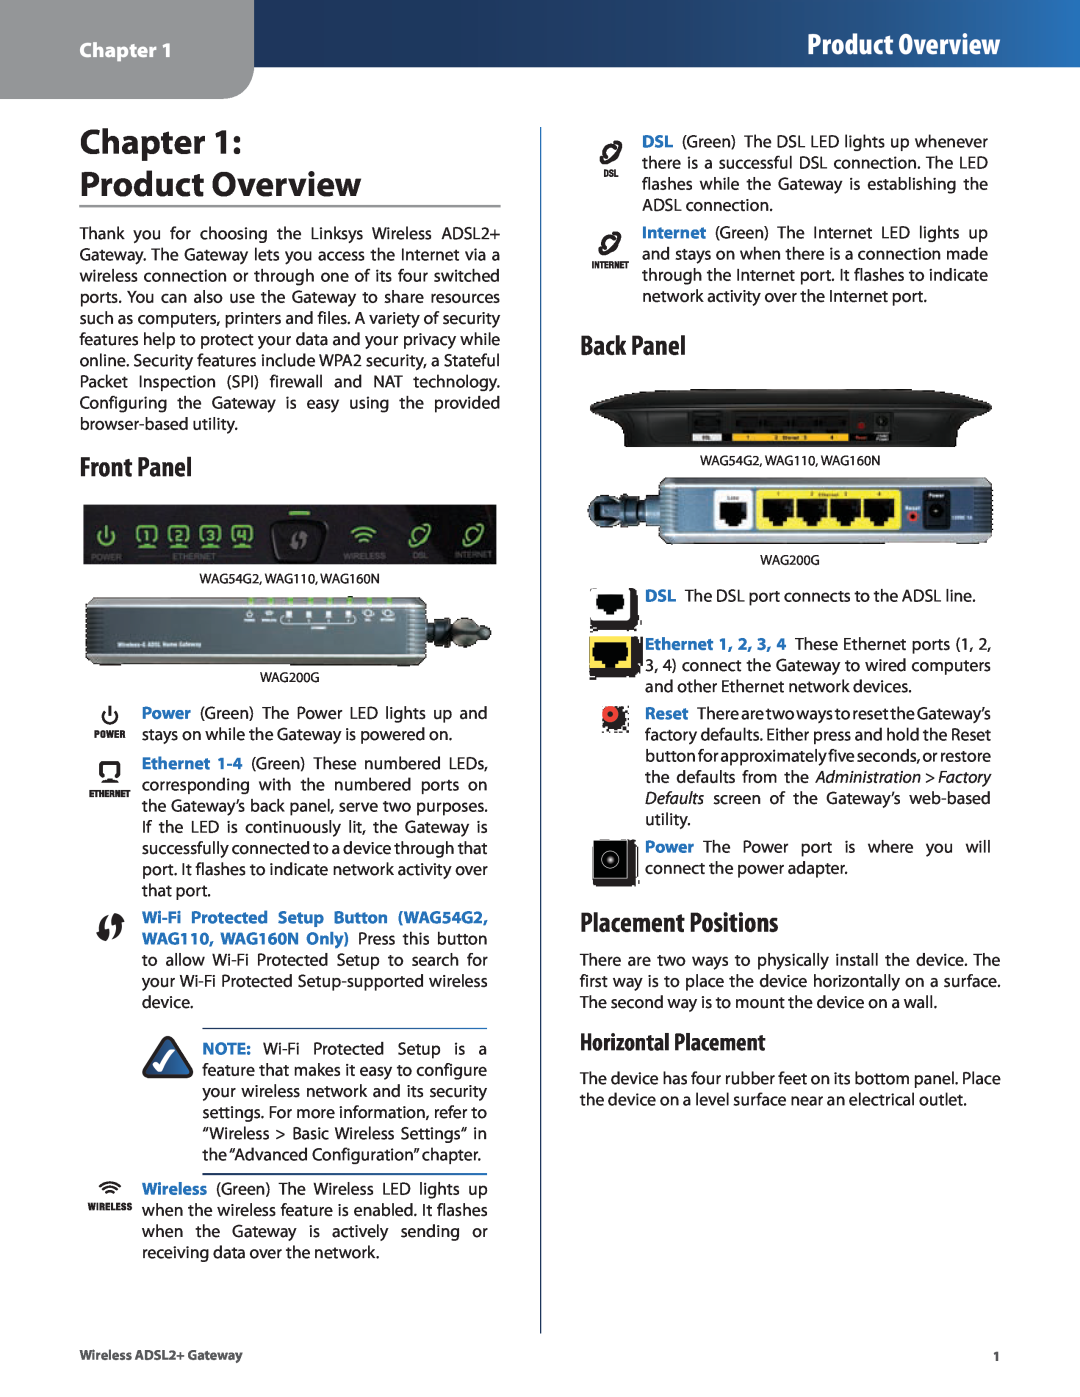 Linksys WAG110, WAG160N, WAG54G2 manual Chapter Product Overview, Front Panel, Back Panel, Placement Positions 